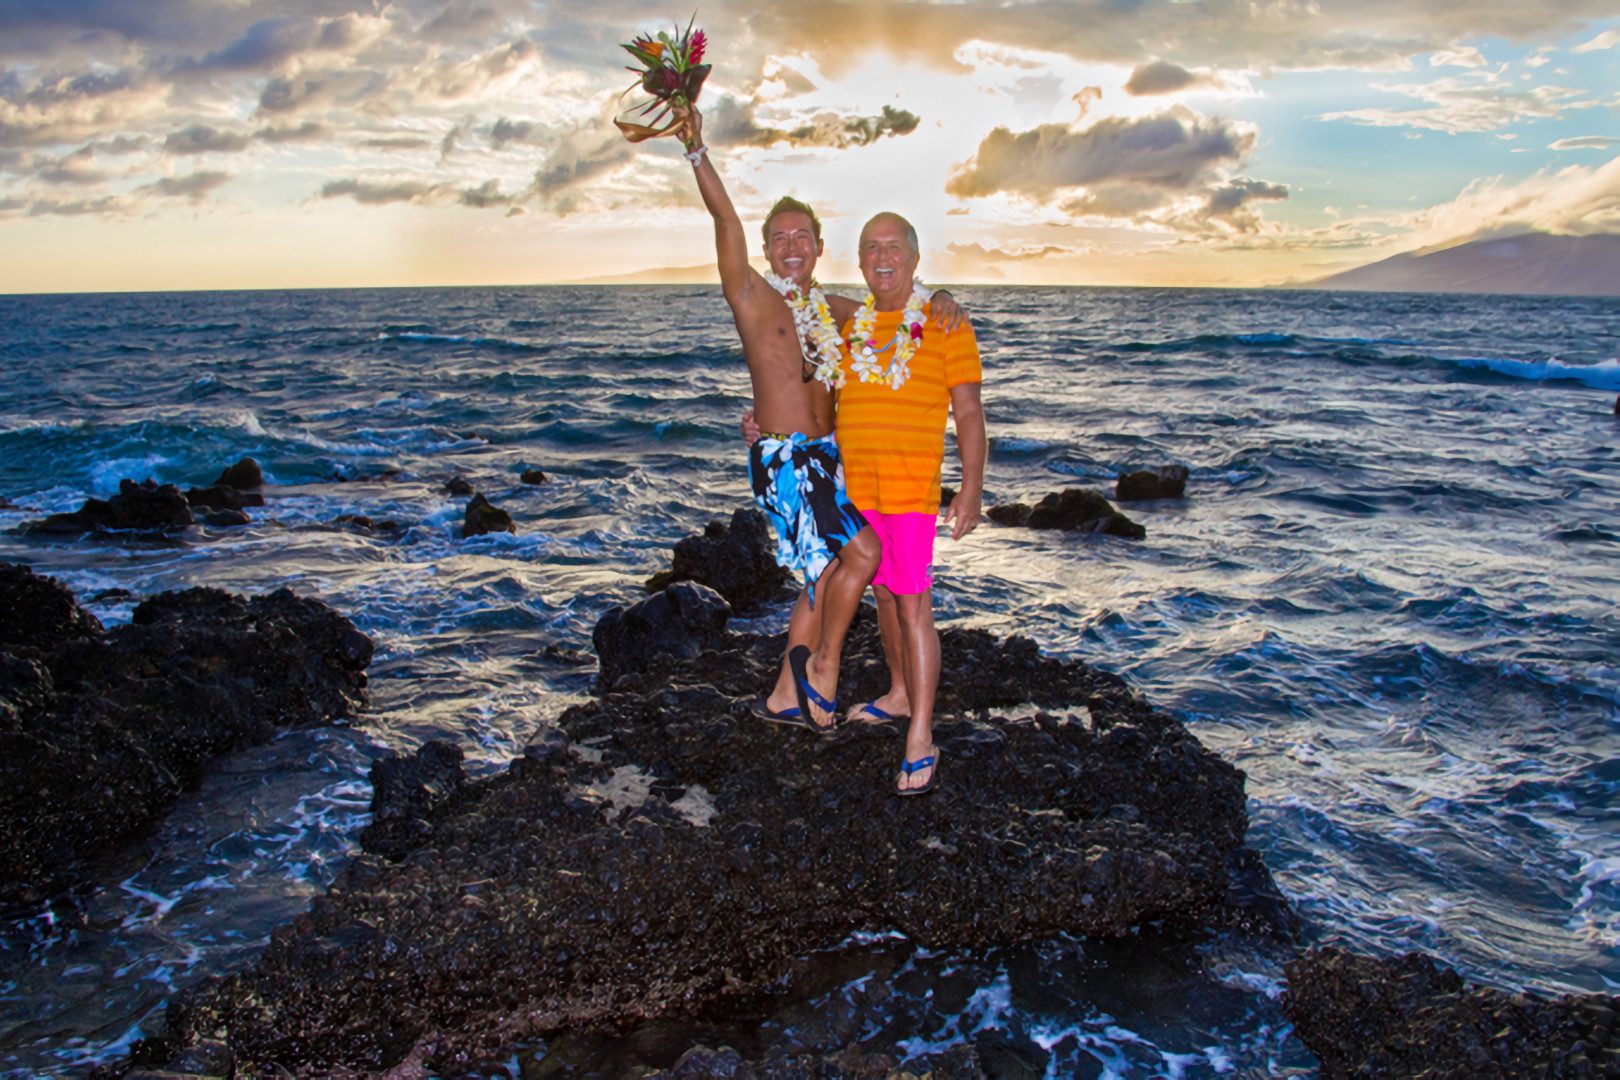 A couple of men posing for photographs at Maui Beach.